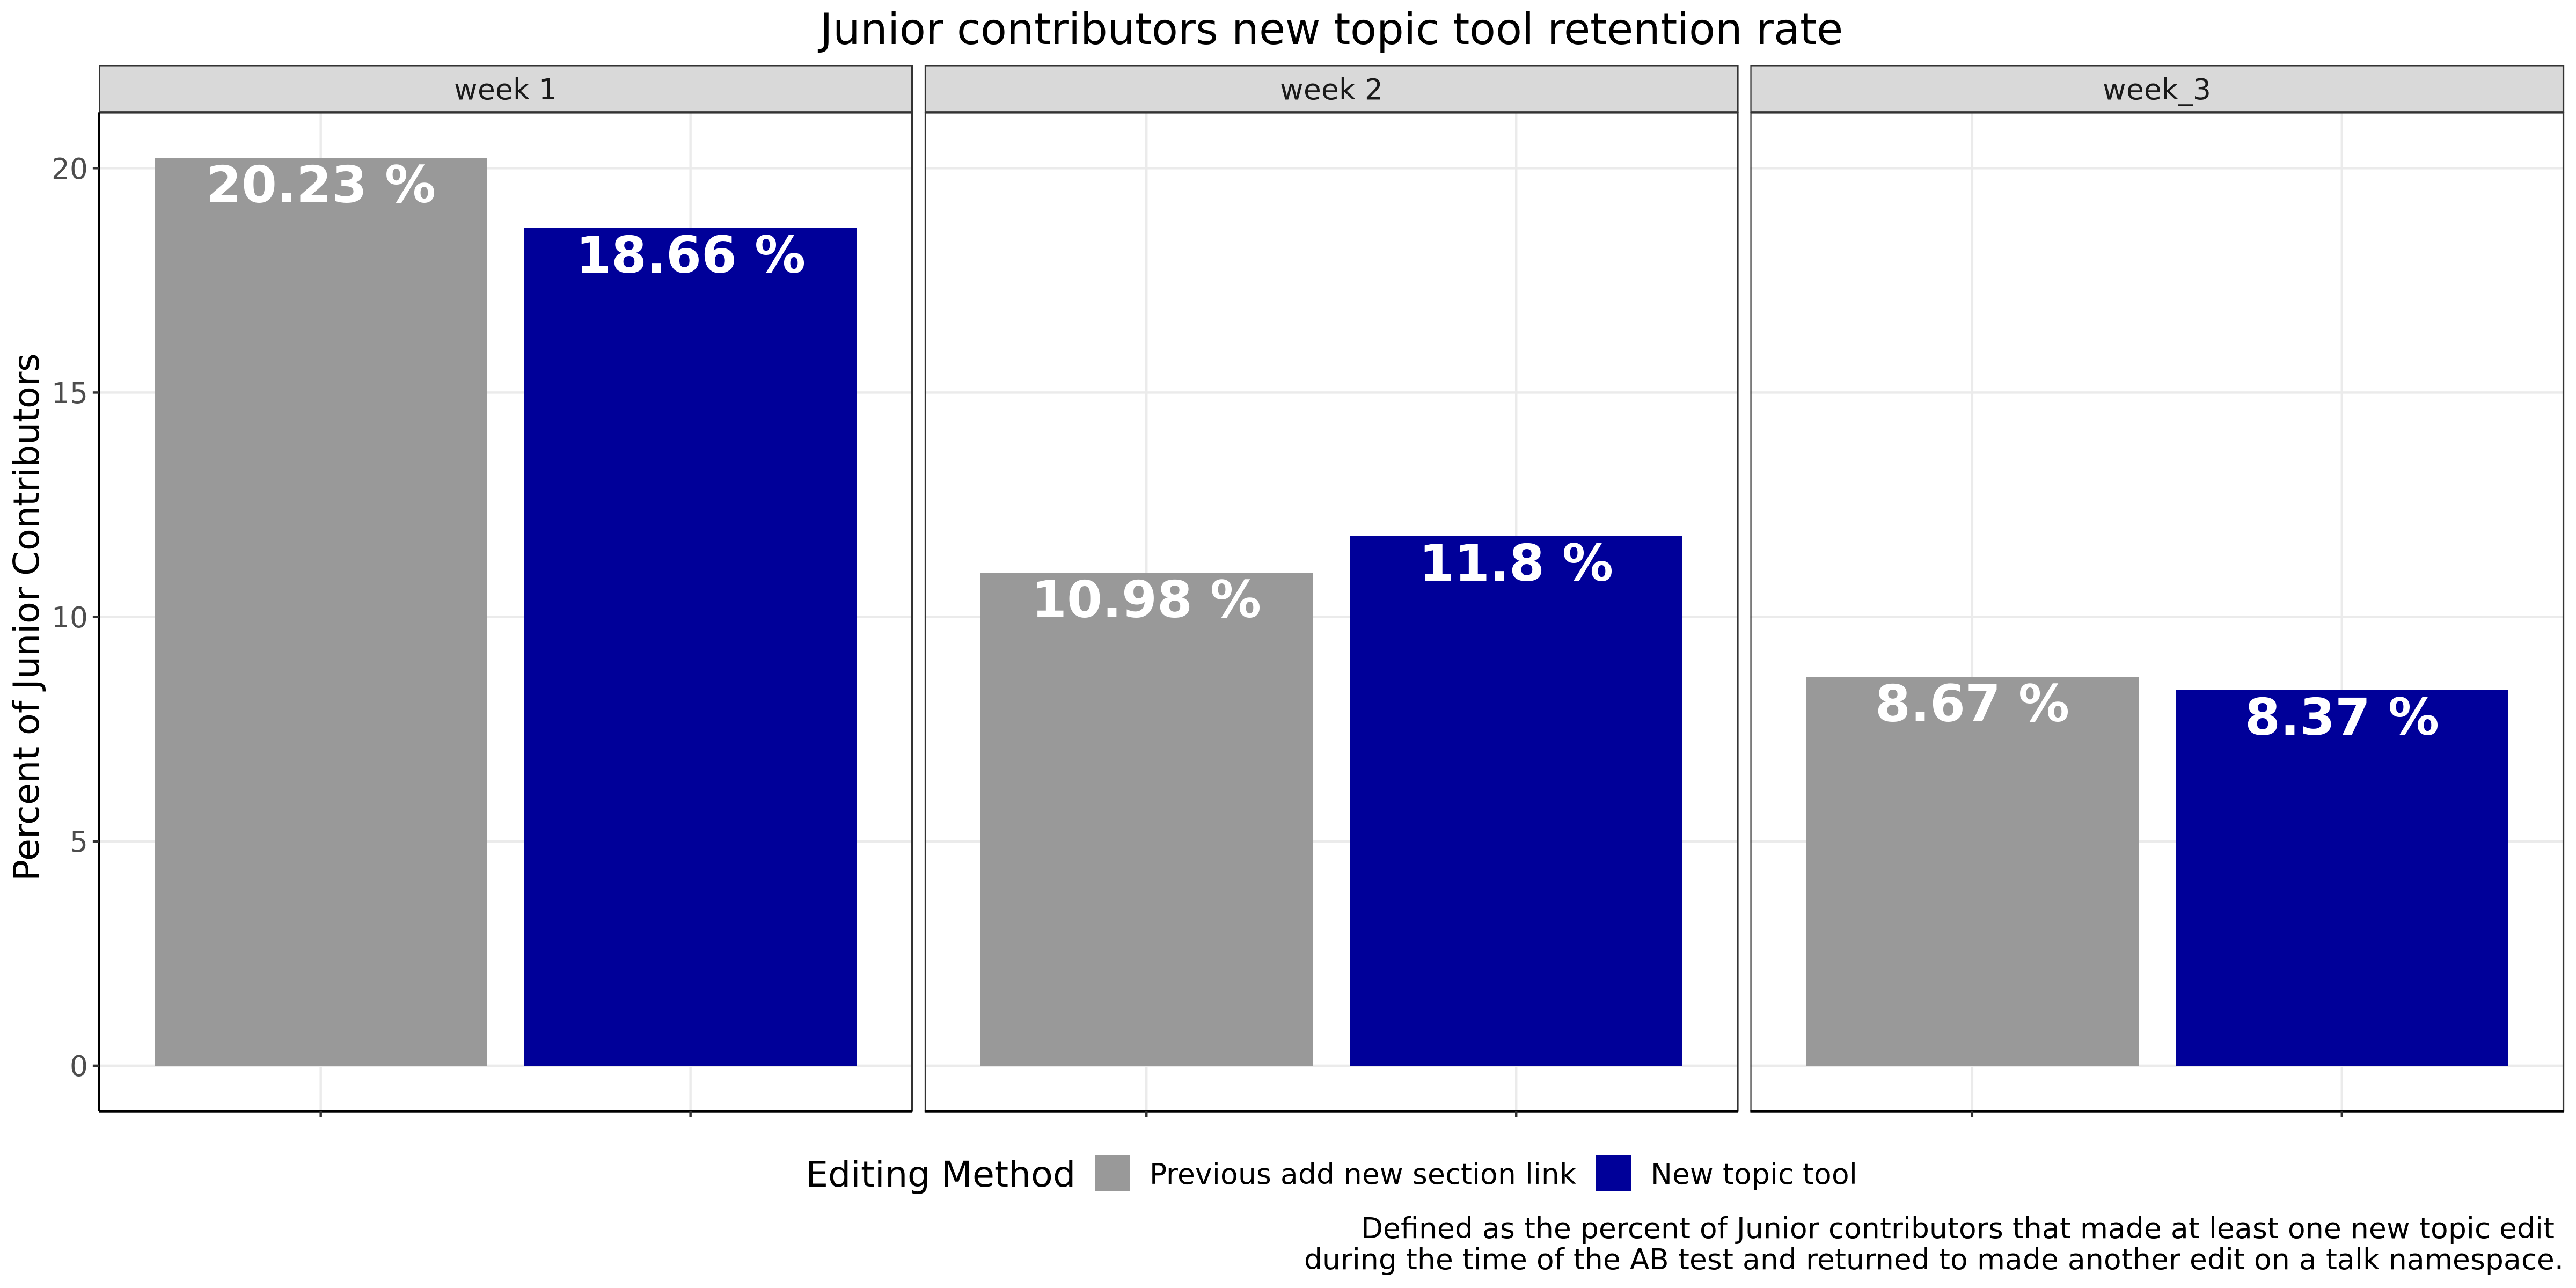 jc_retention_rate.png (2×4 px, 195 KB)